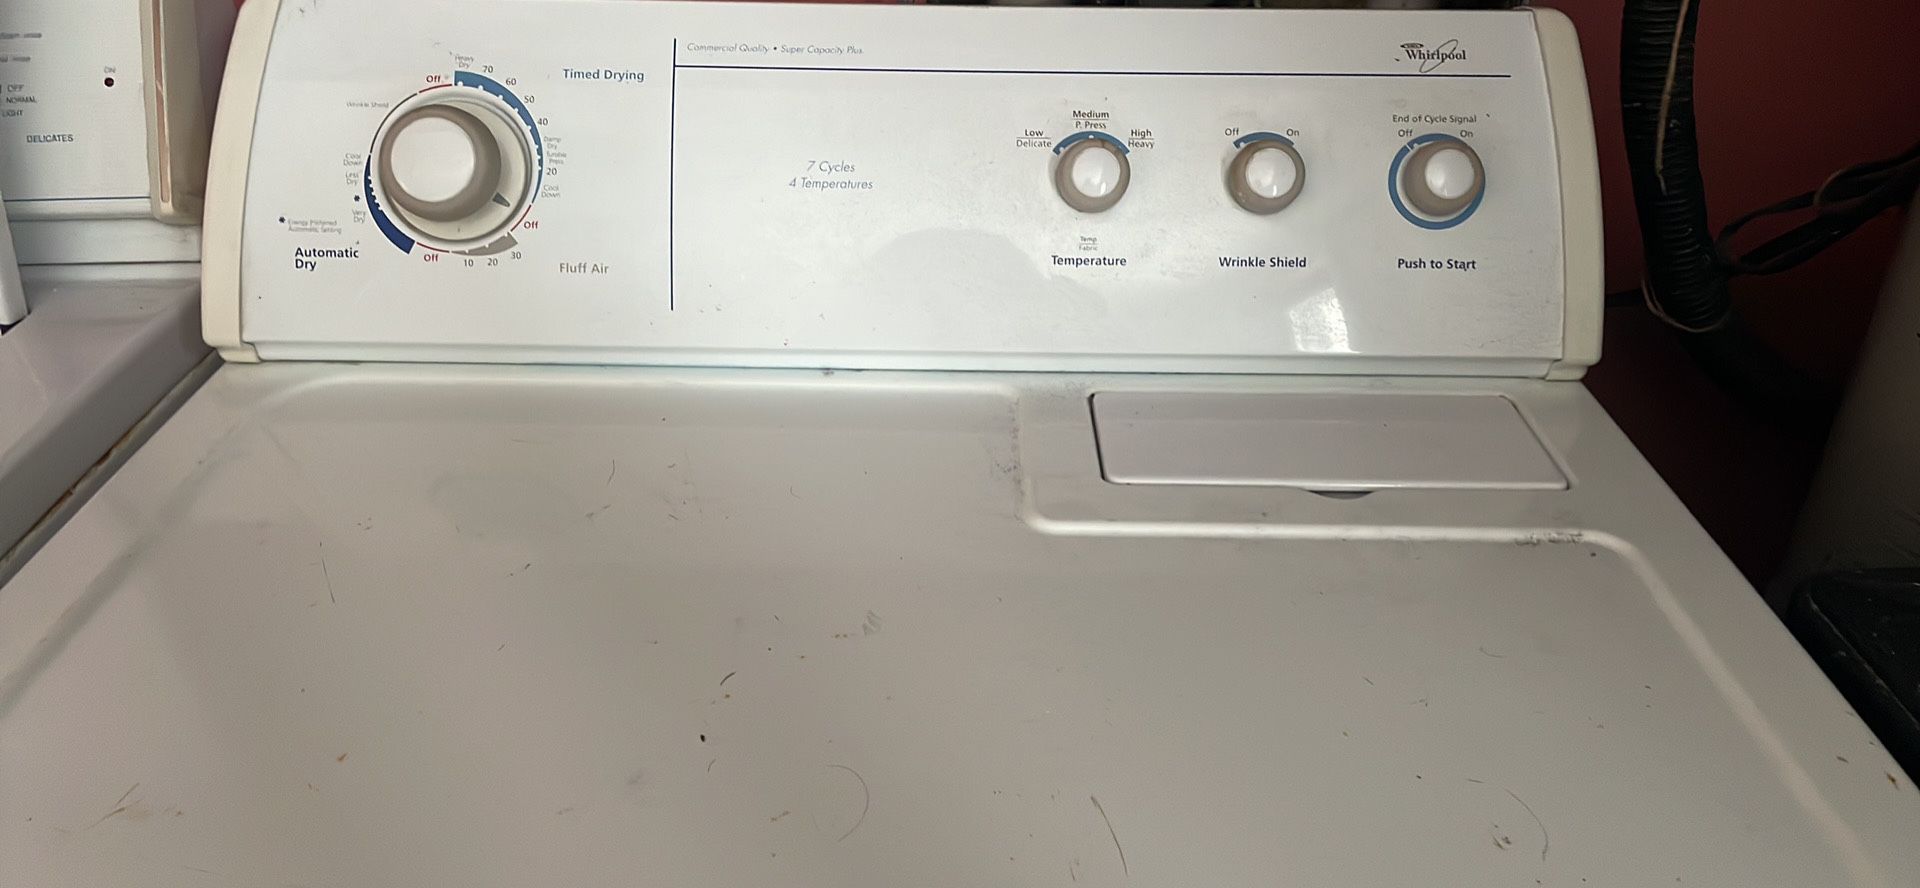 Washer And Gas Dryer 